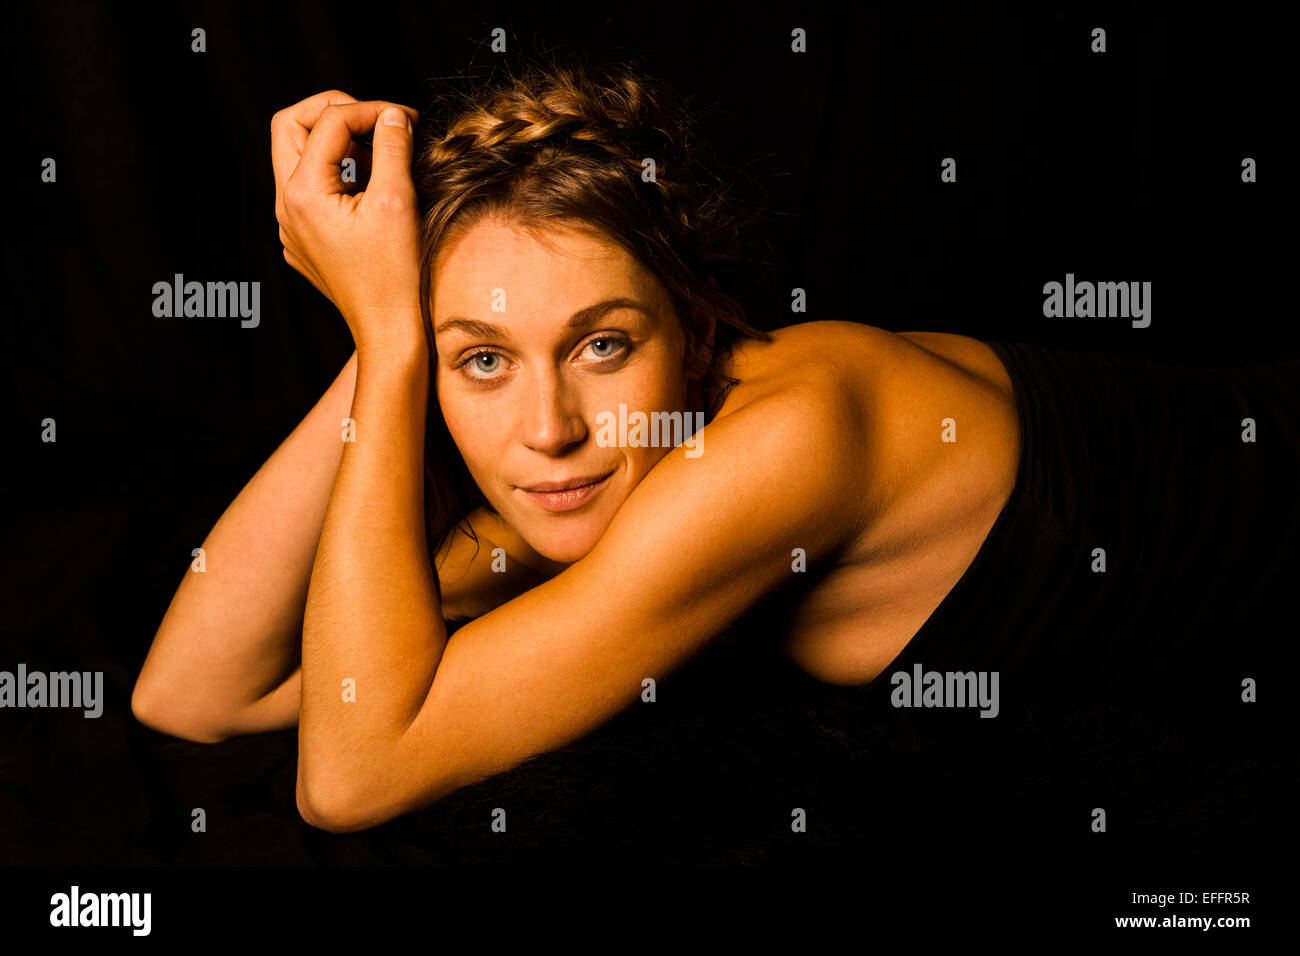 Portrait of smiling woman wearing black corsage in front of black background Stock Photo